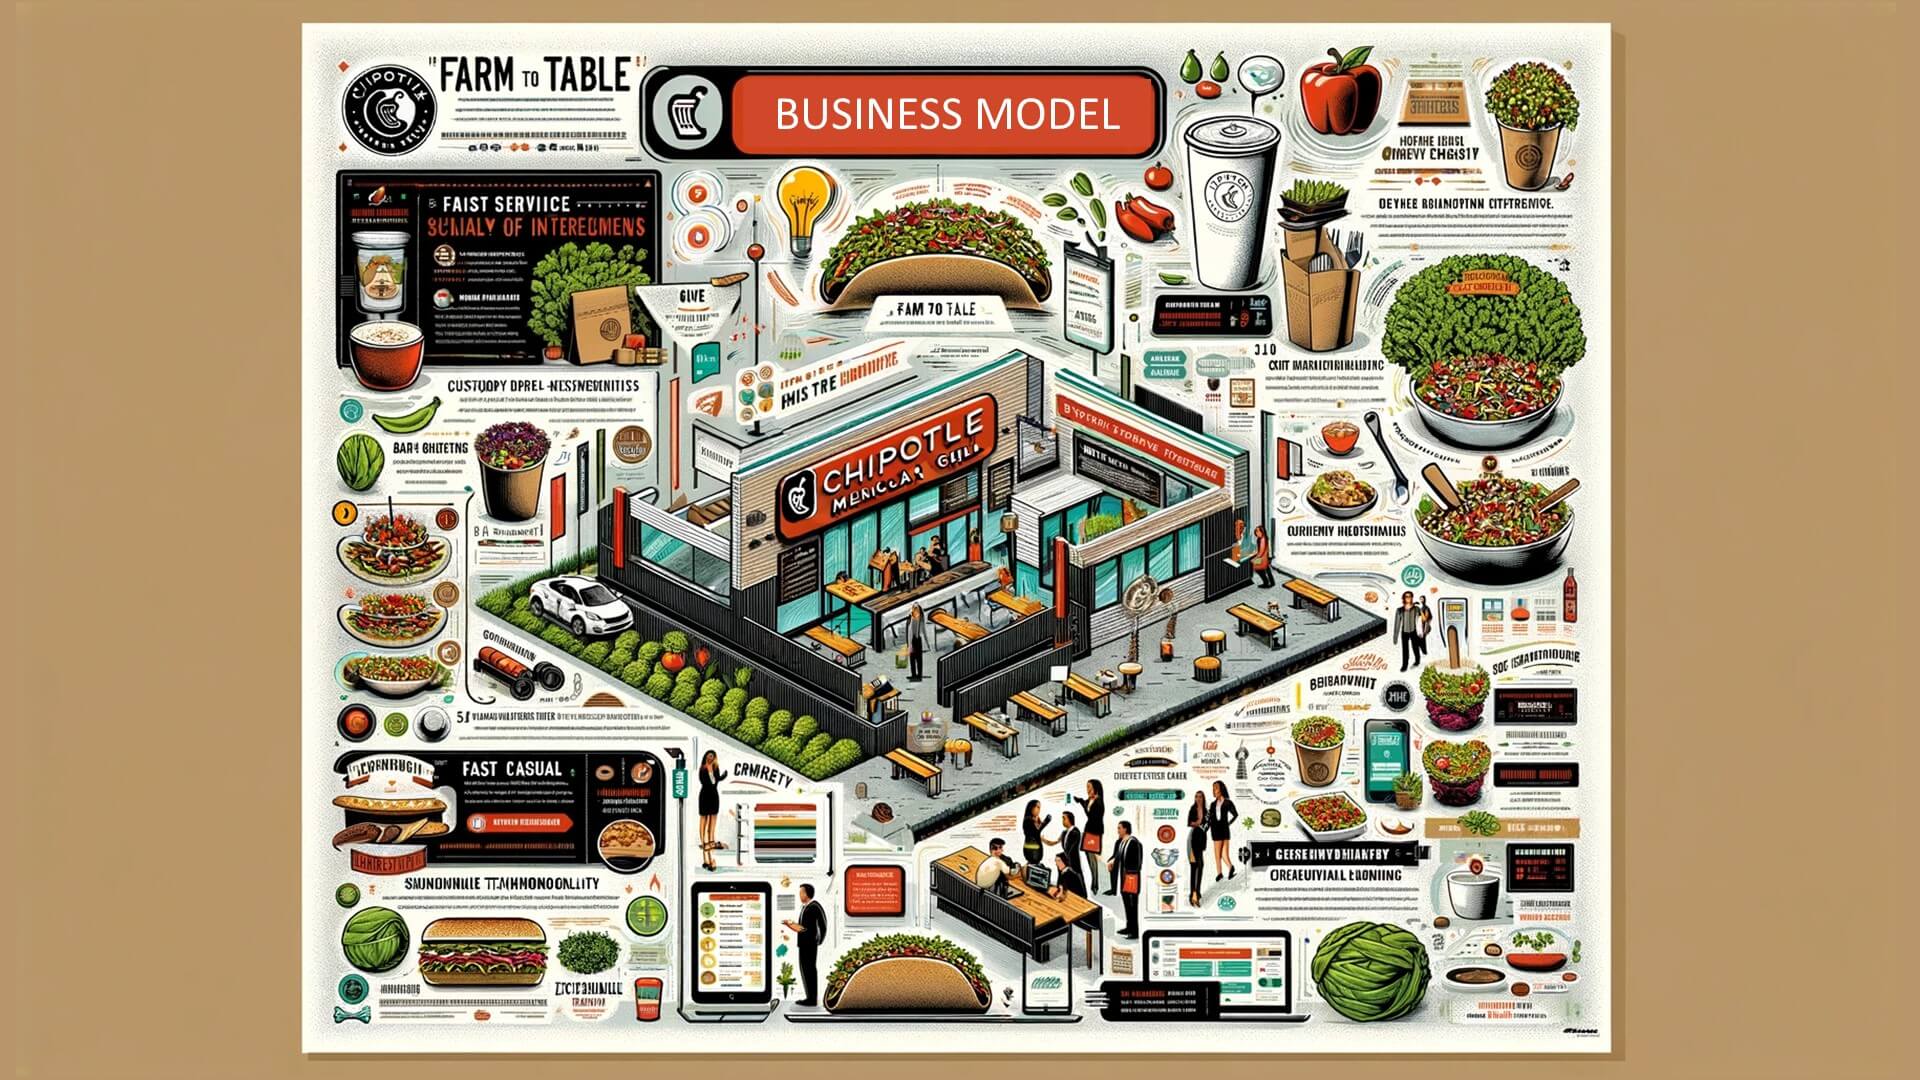 Strategic Insights 2024: A SWOT Analysis of Chipotle (Plus Free PPT)